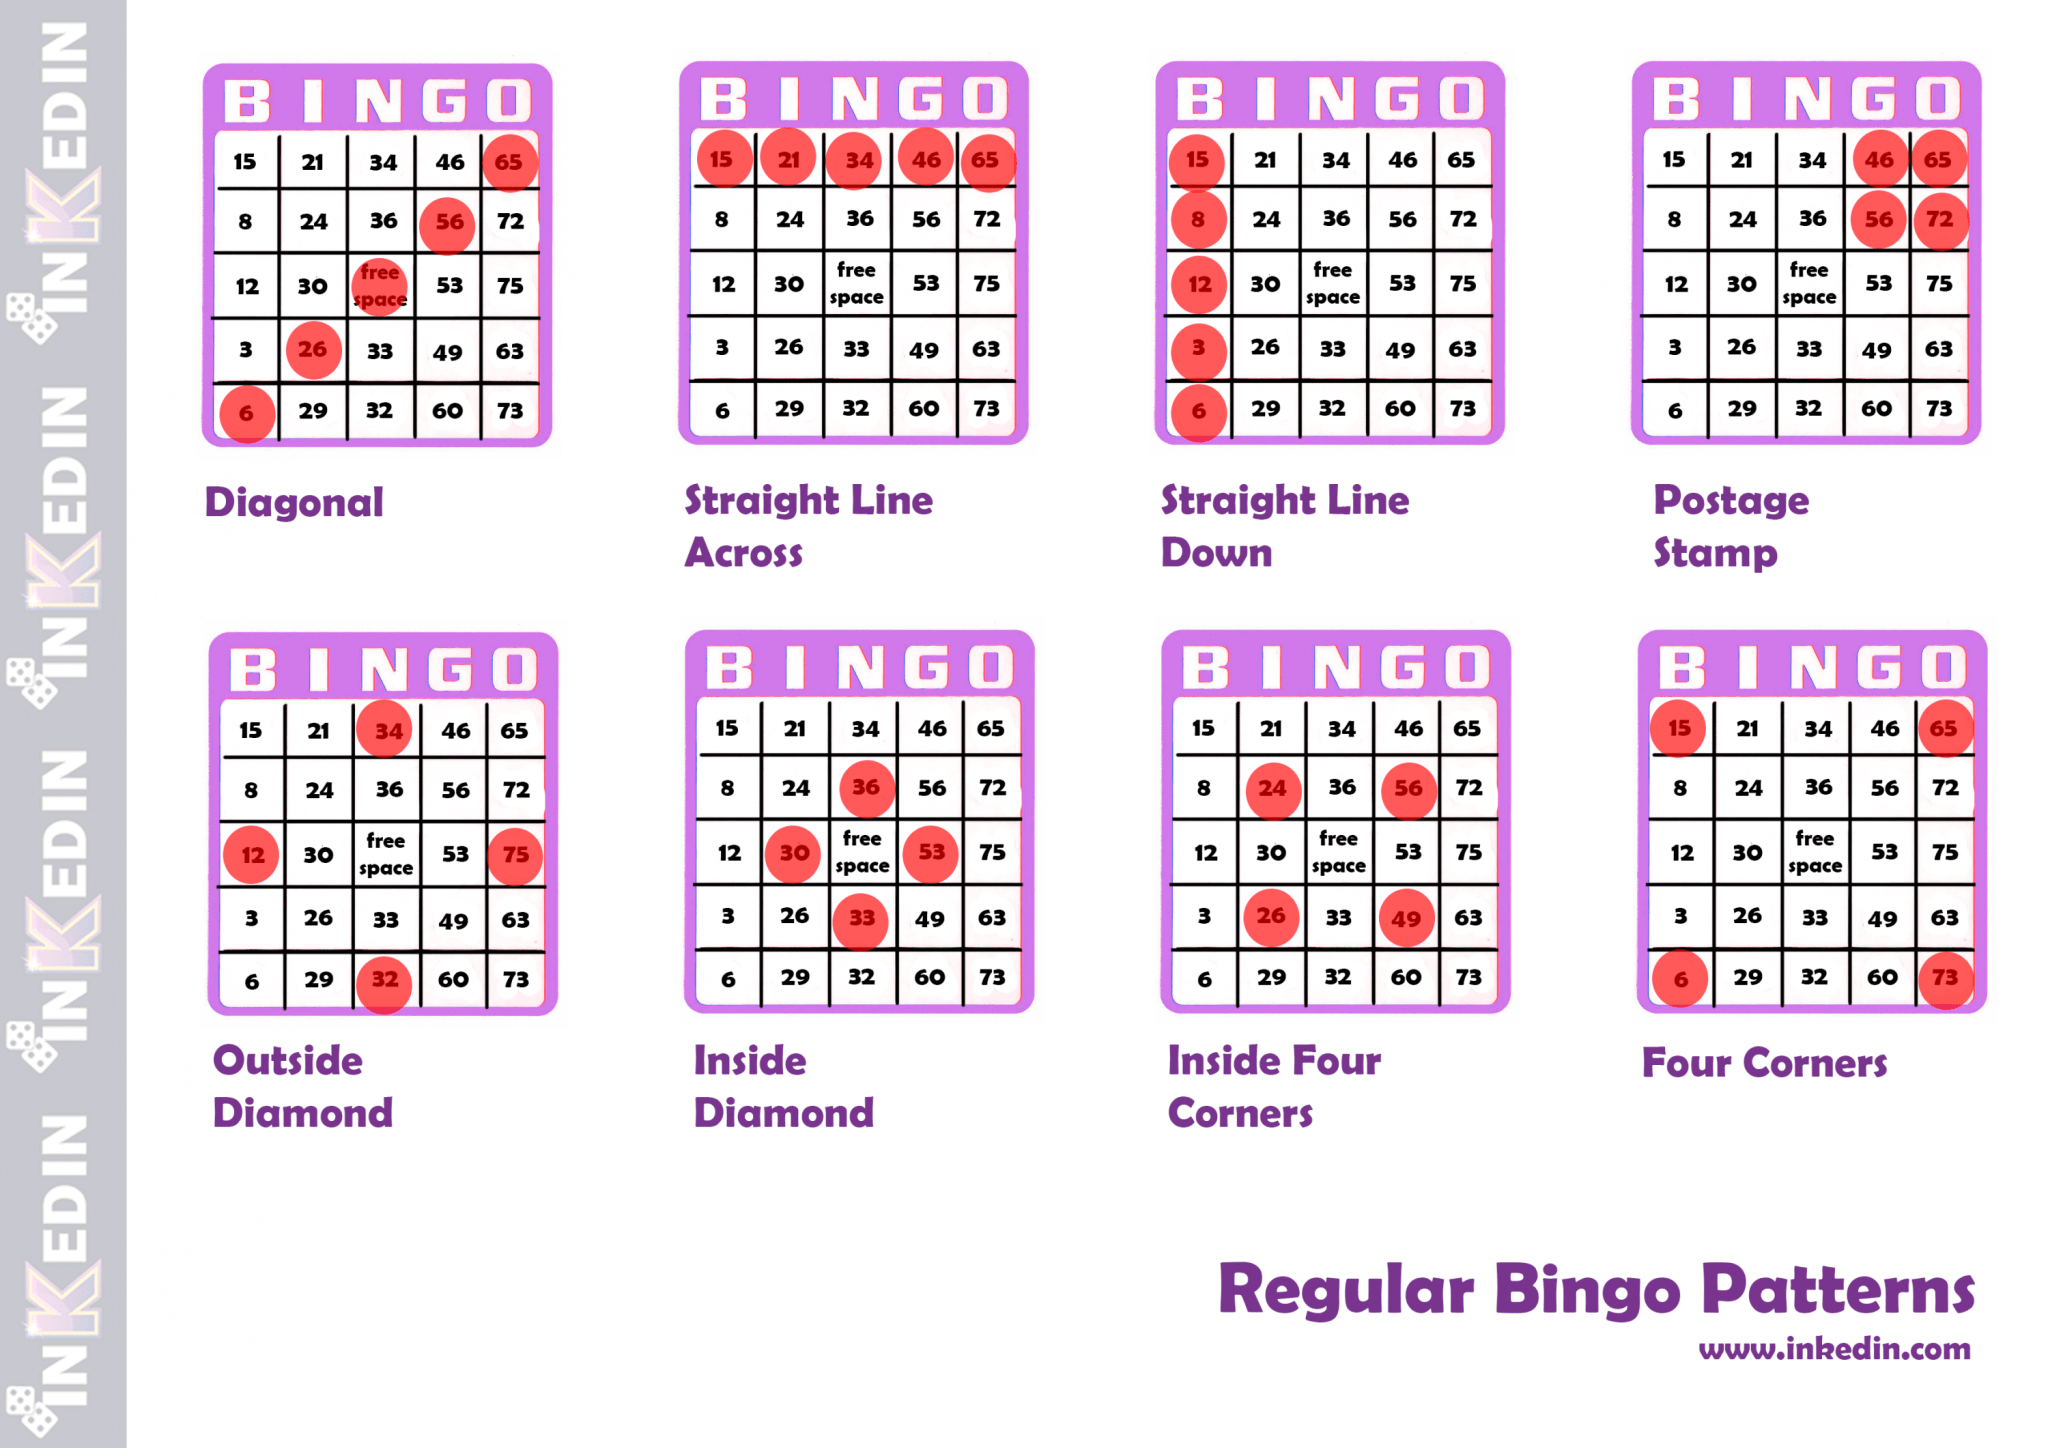 How To Play Bingo The Ultimate Guide For Beginners To Learn 